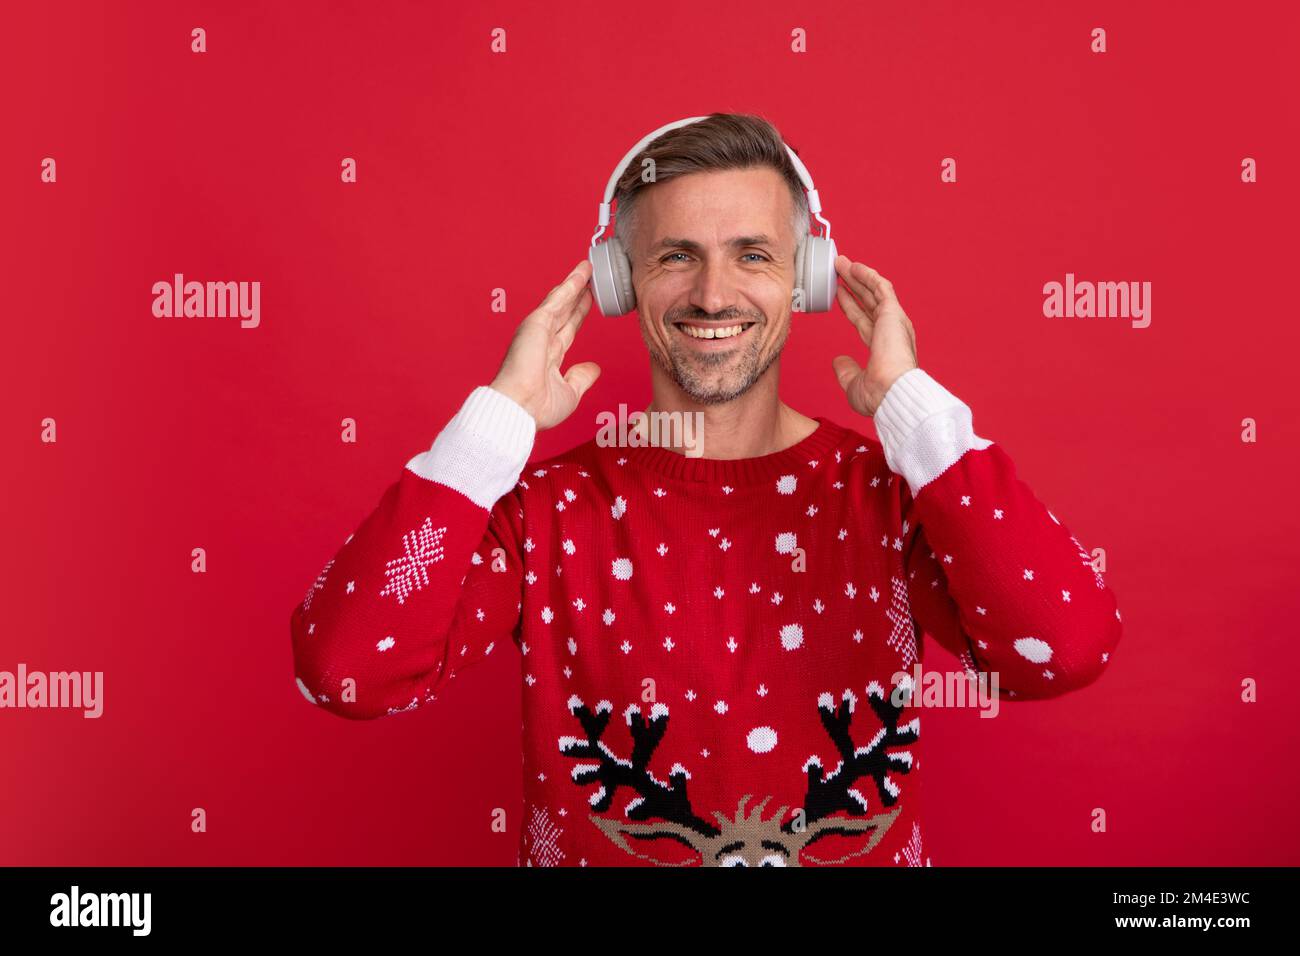 Christmas music. Santa with headphone. Portrait of middle aged man in sweater isolated over red background. Concept of holidays, happiness, emotions Stock Photo